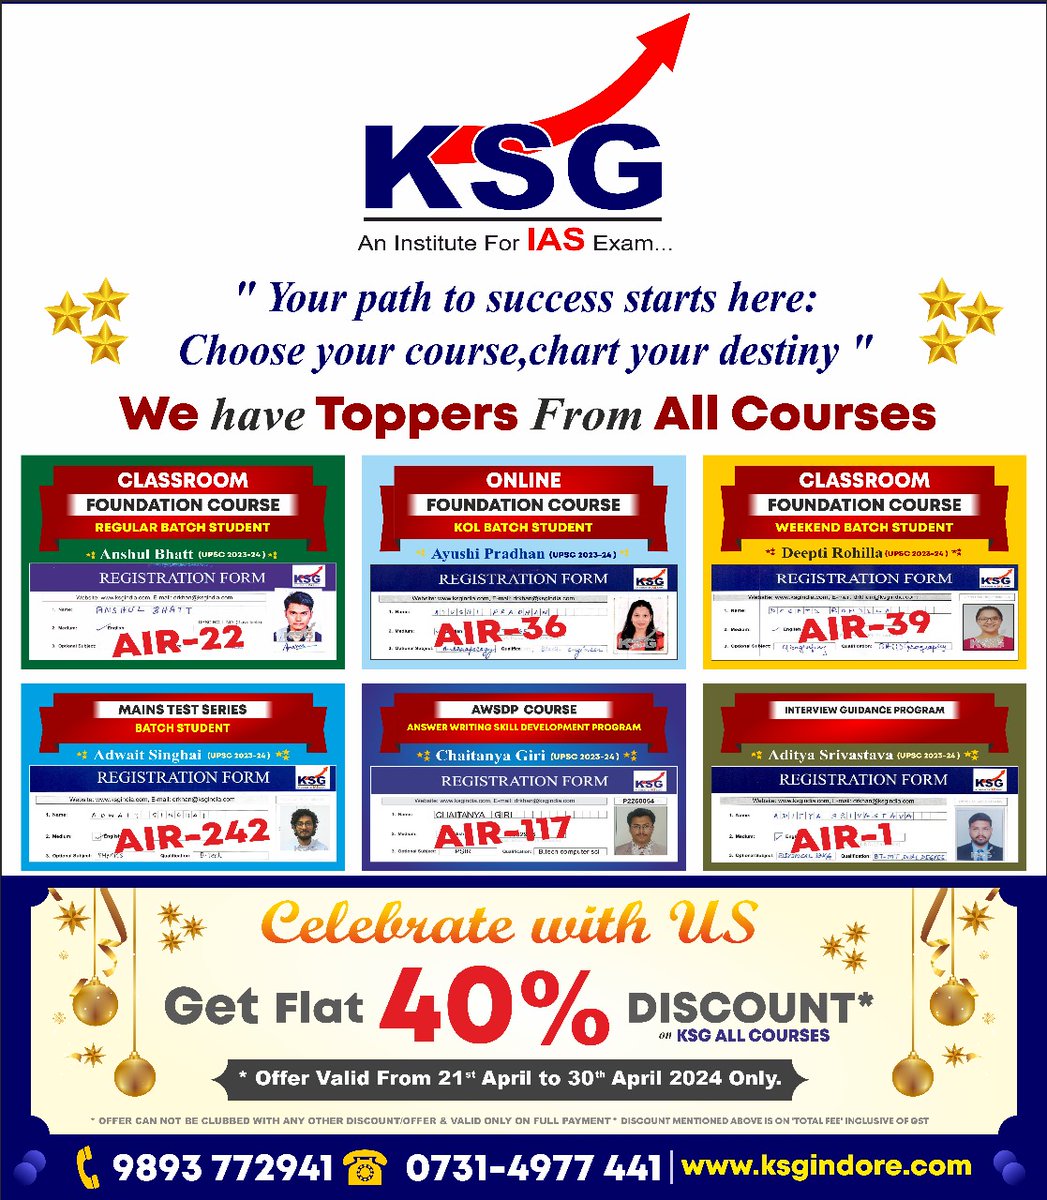 'Your path to Success starts here: Choose your Course, Chart your destiny '

#KSGIndore #UPSCPreparation #CivilServicesExam #IASCoaching #celebrations #toppers #success #achievement #UPSCToppers #IASCoachingInstitute #Courses